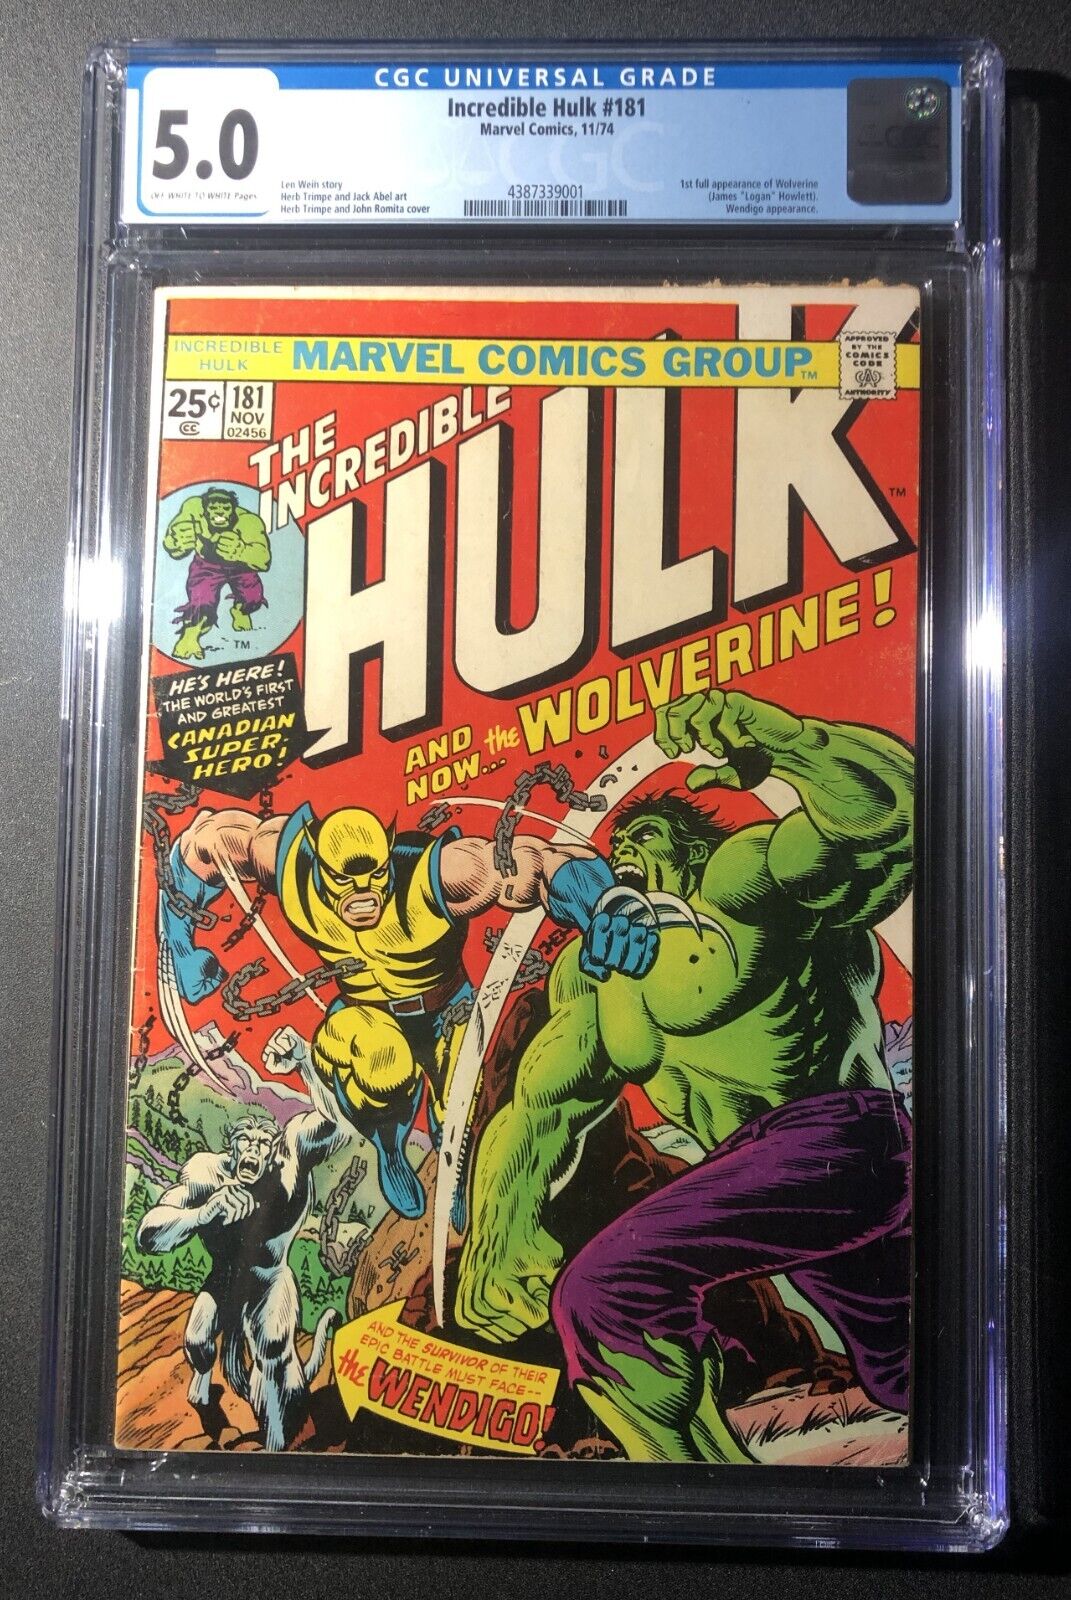 The Incredible Hulk #181 CGC 5.0 Marvel Comics+ KEY+ 1st Appearance of Wolverine